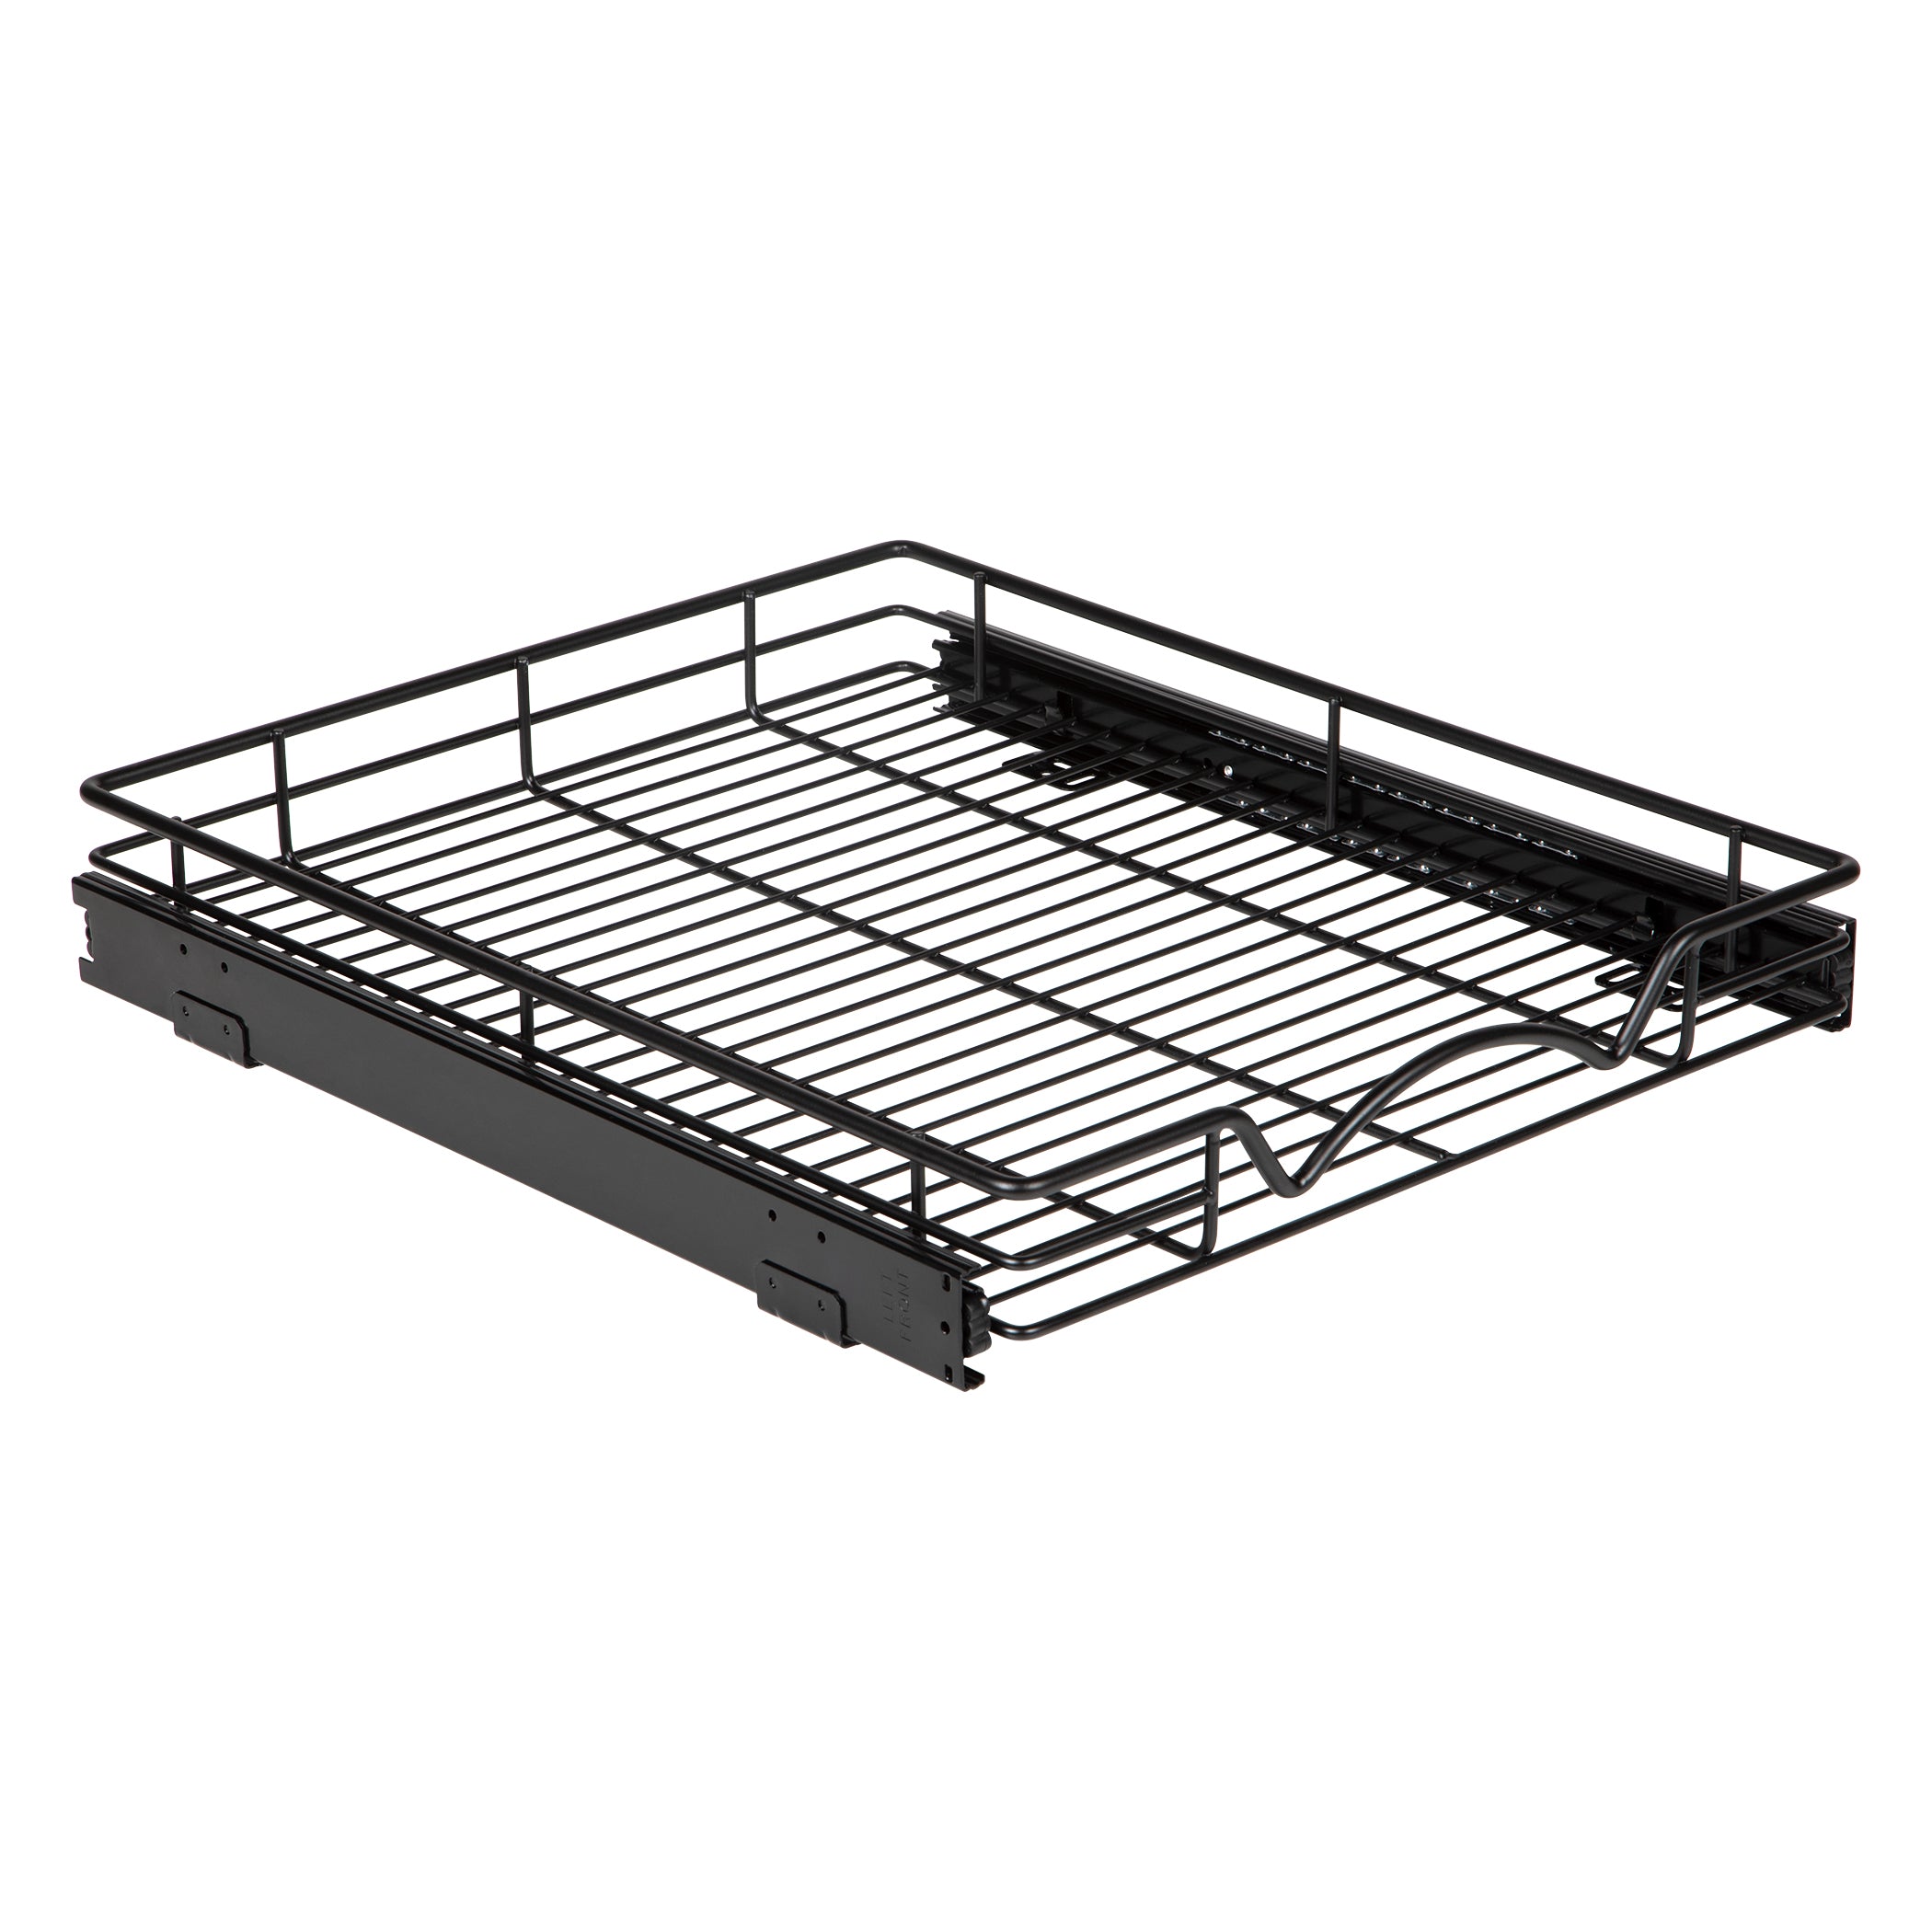 Hold N’ Storage Pull Out Cabinet Drawer Organizer, Heavy Duty-with 5 Year Limited Warranty, Steel Metal -Black Finish